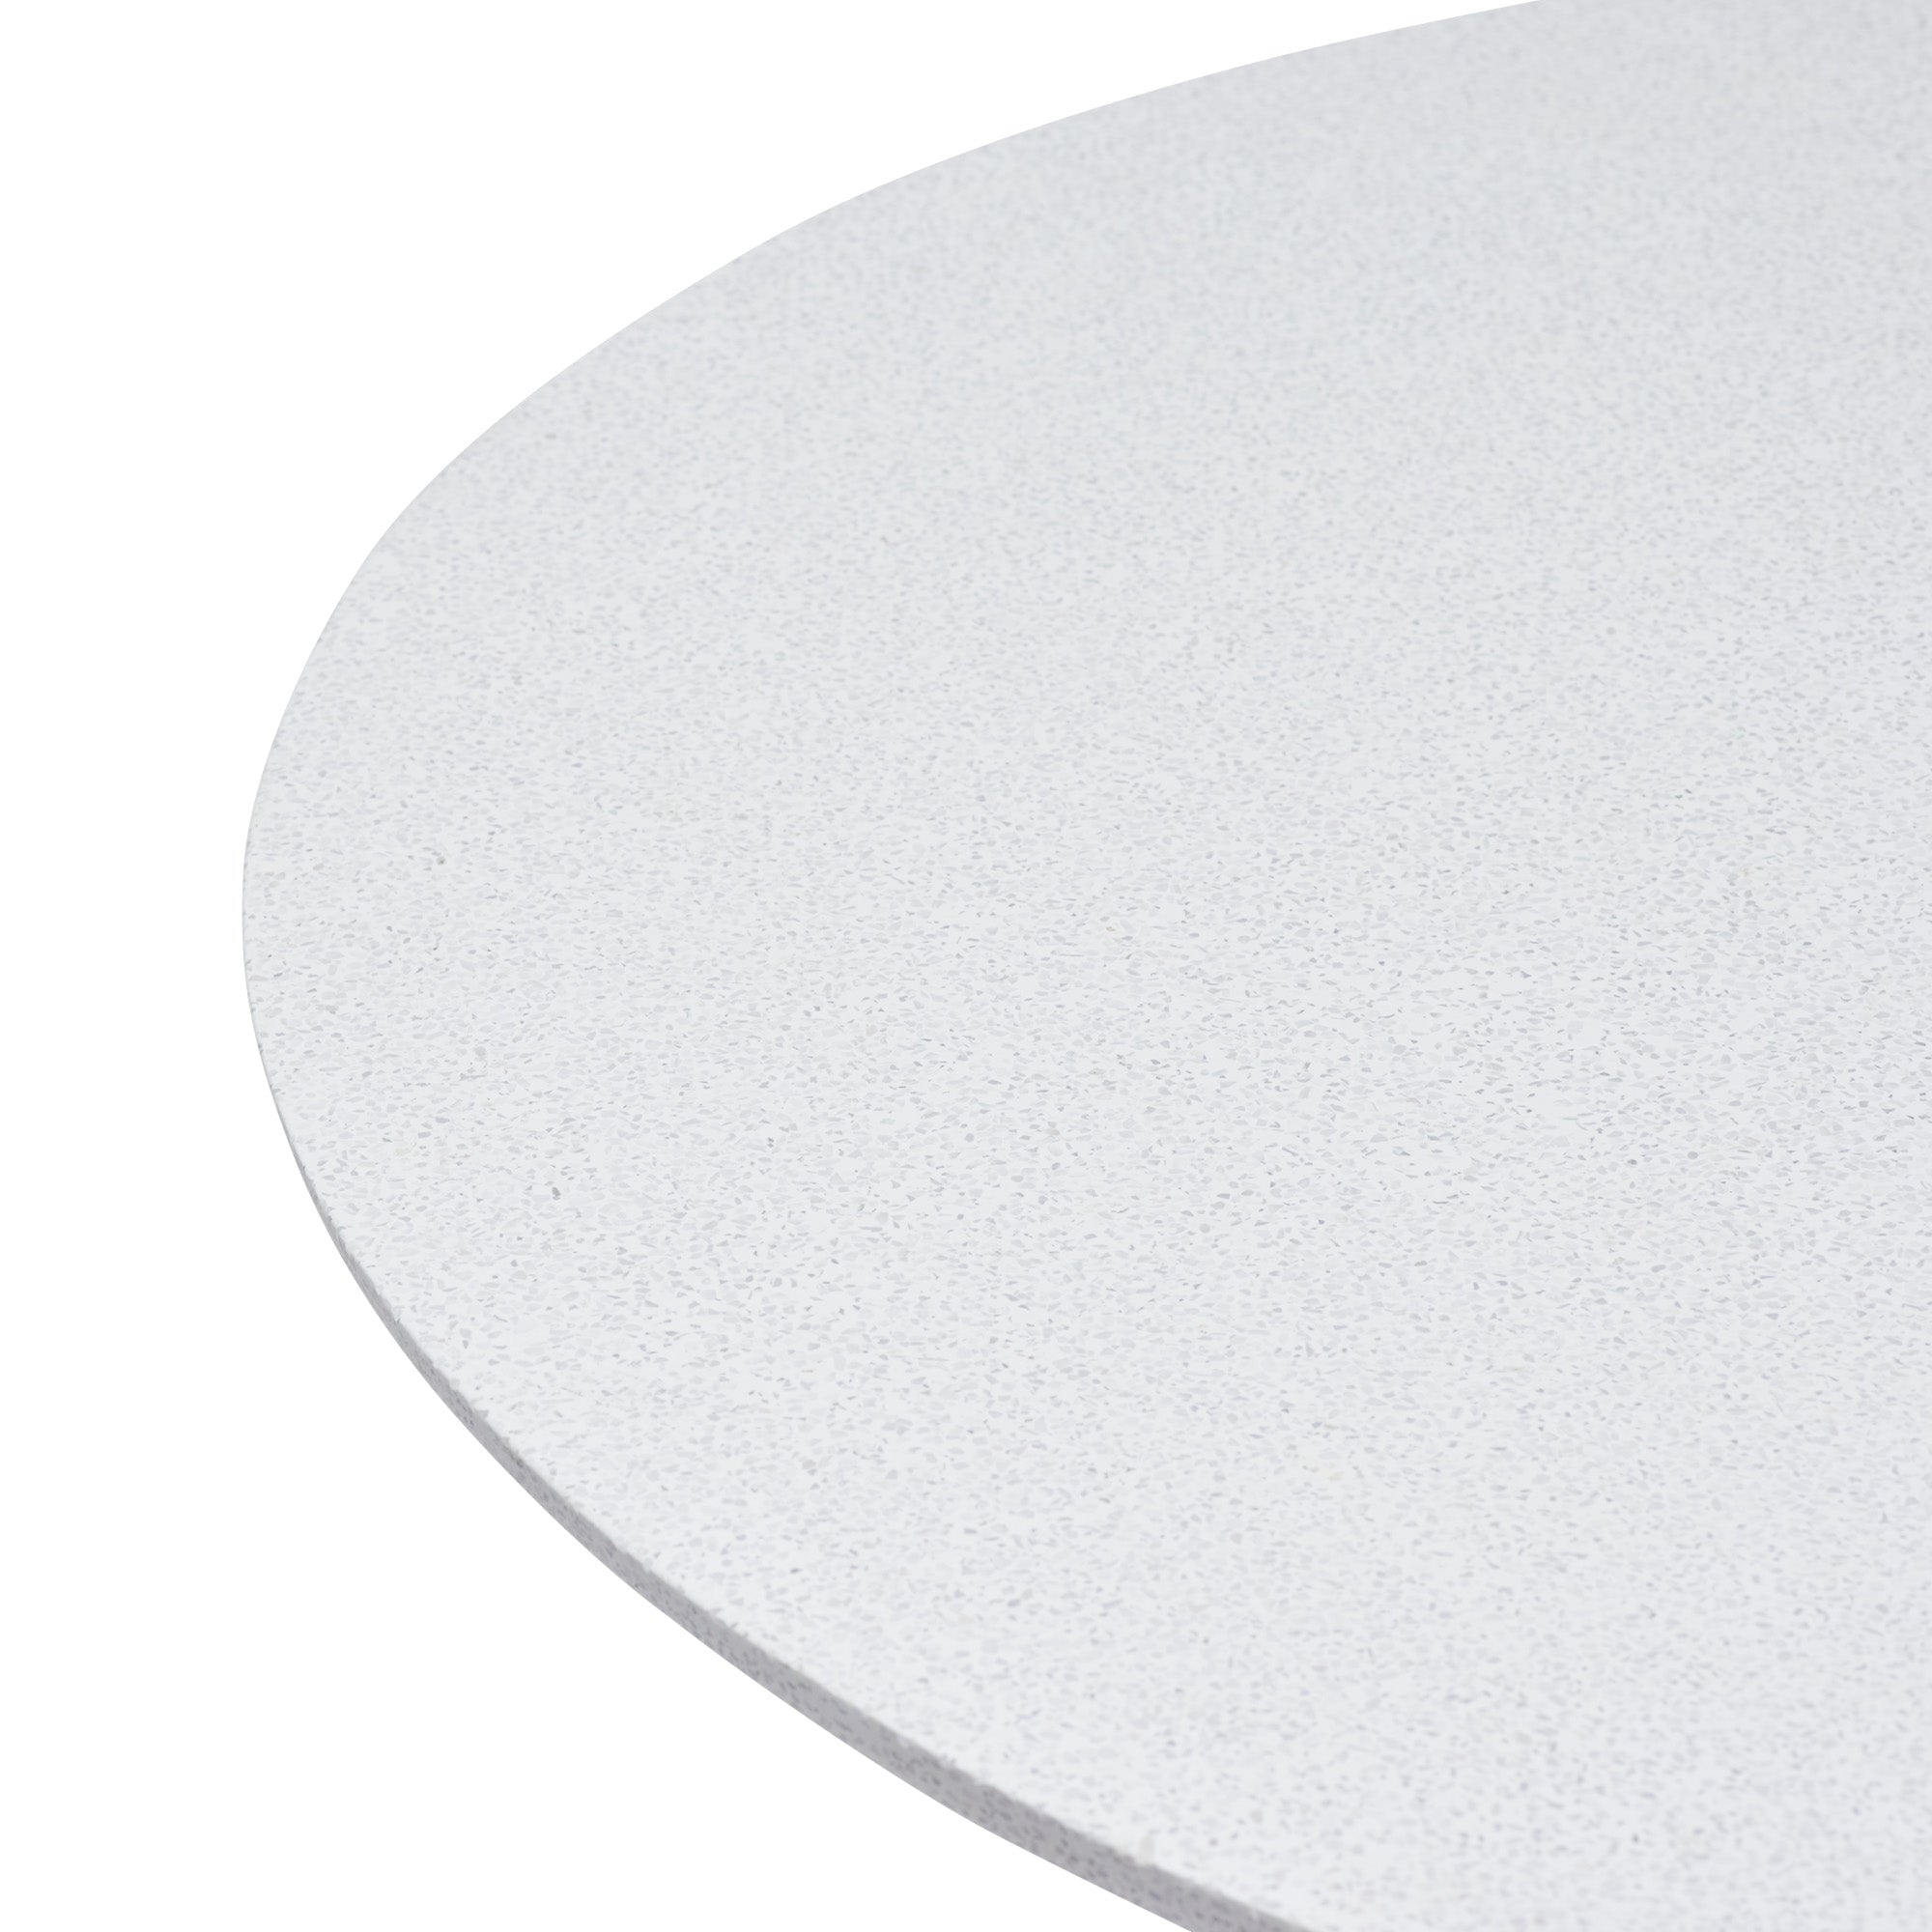 Avalon Outdoor Cafe Table White